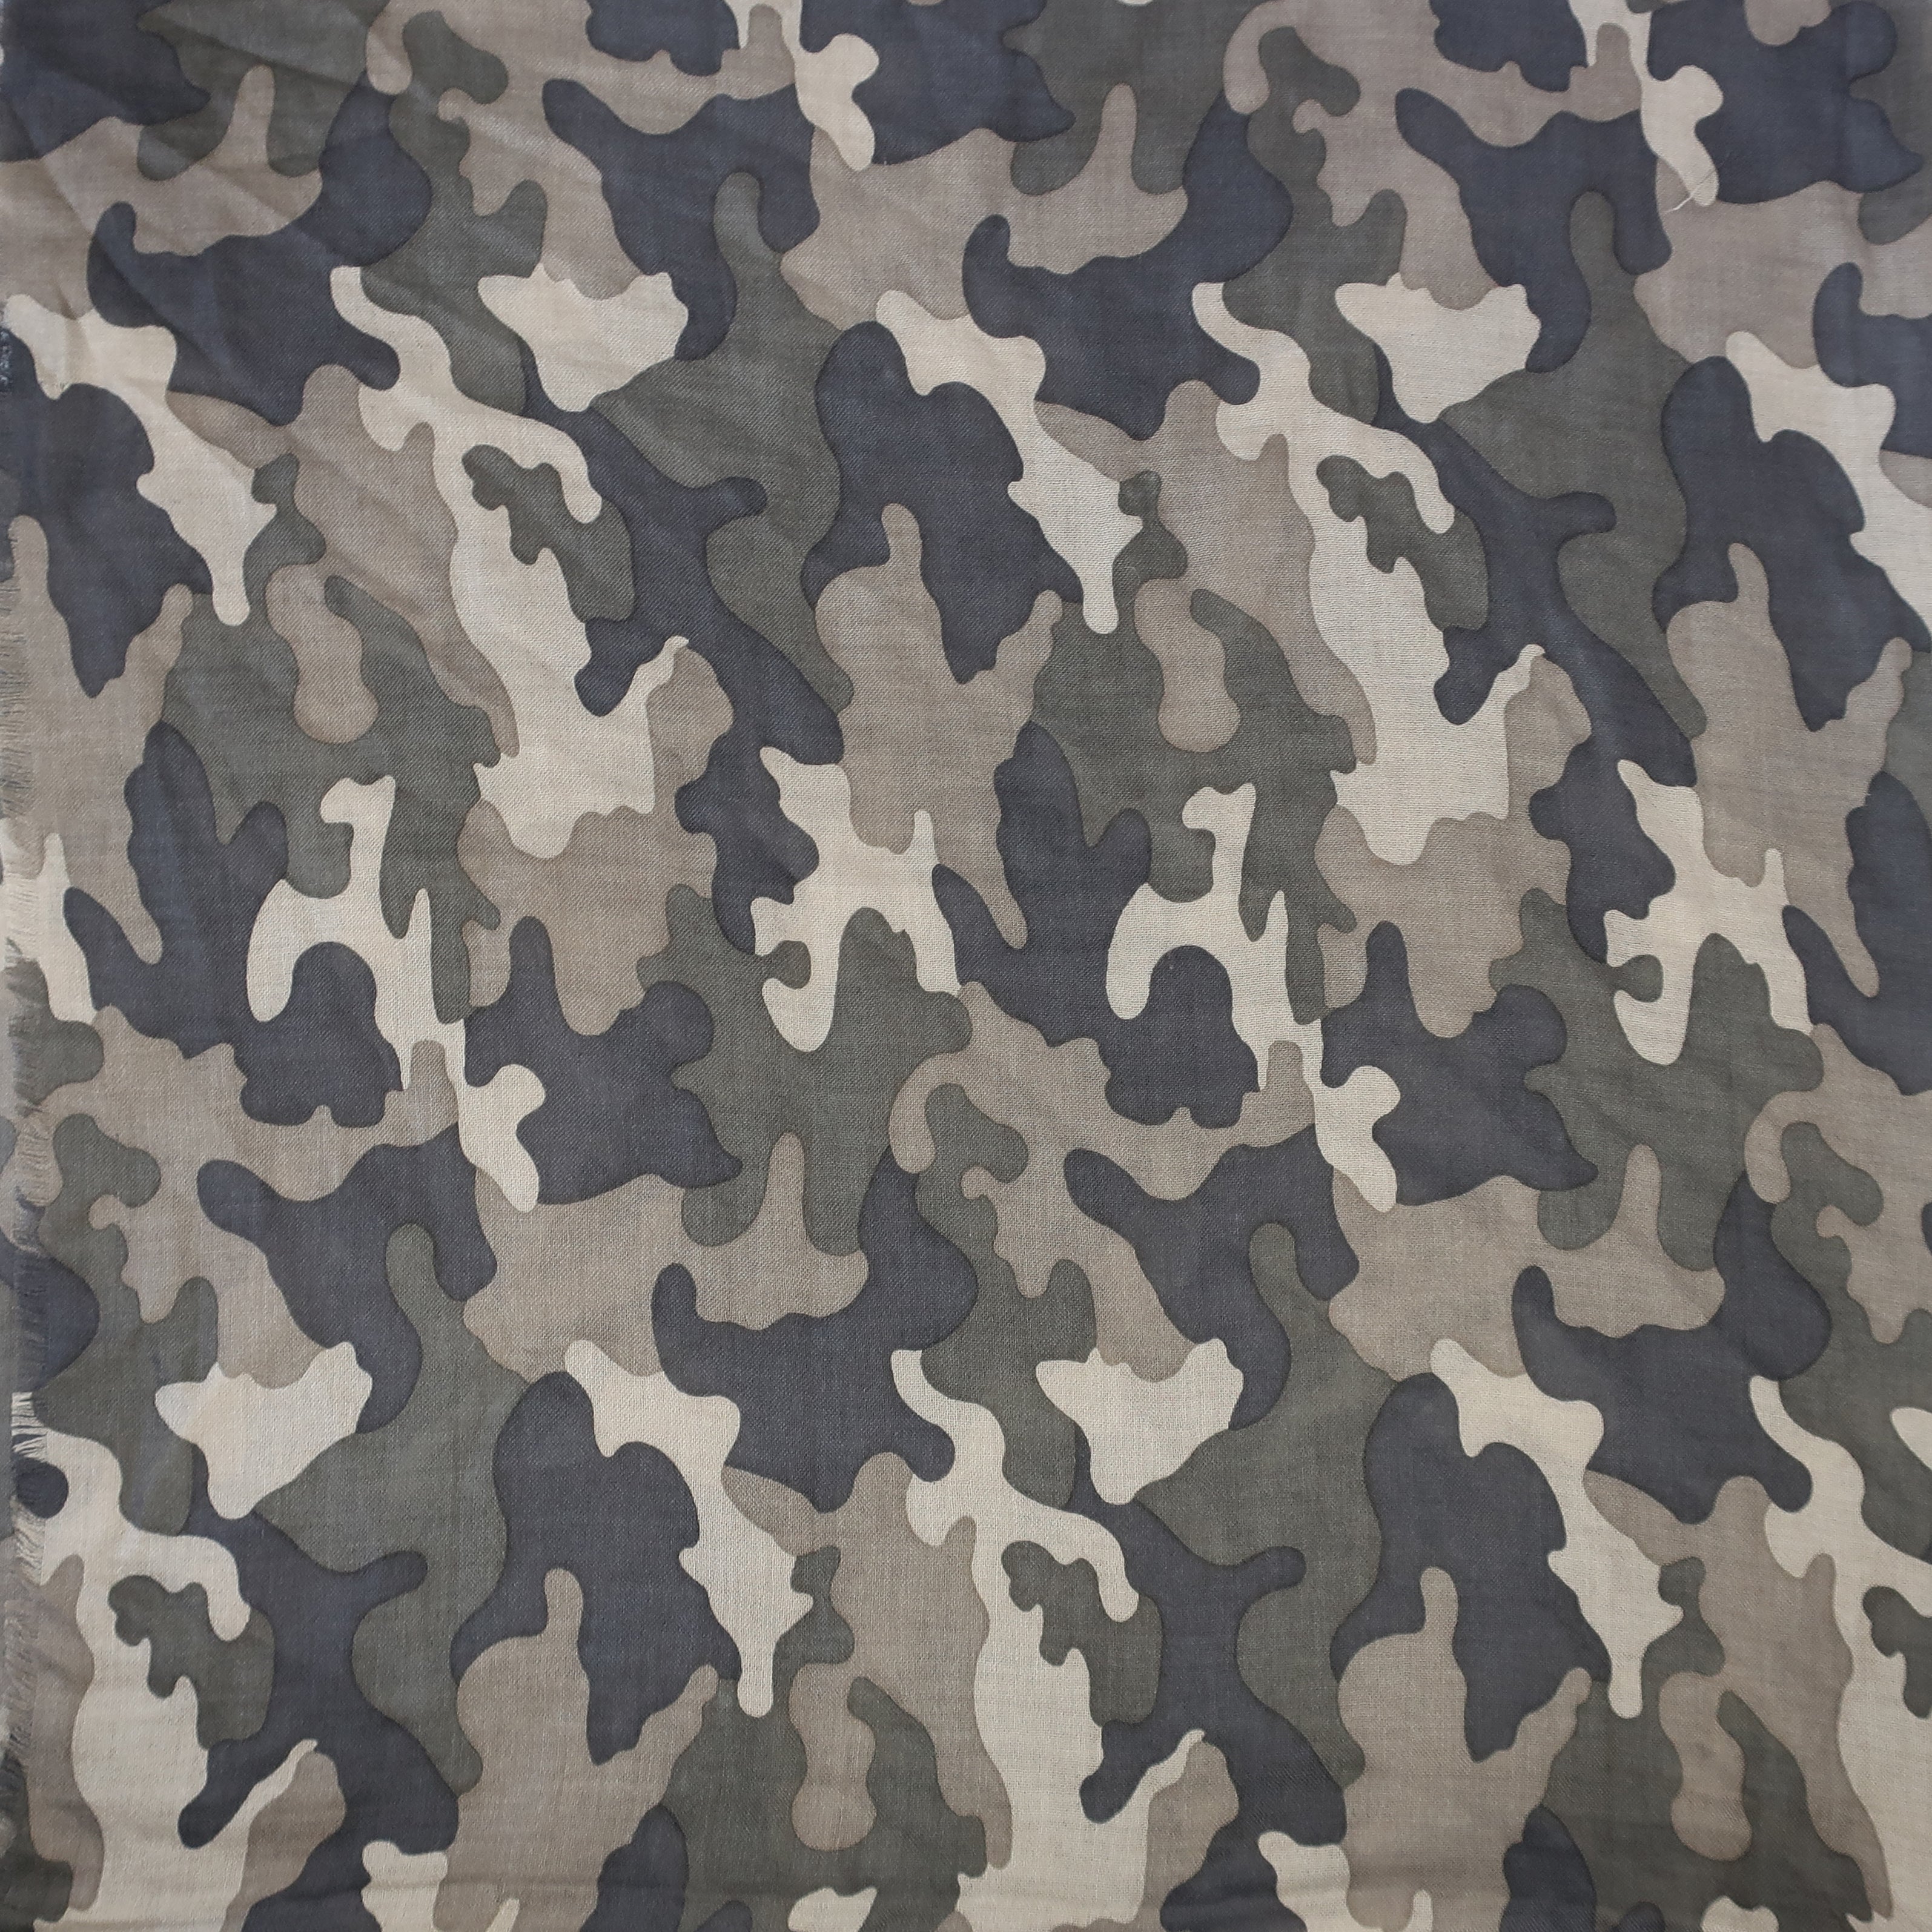 Blue Pacific Cashmere and Modal Scarf in Desert Taupe Camouflage